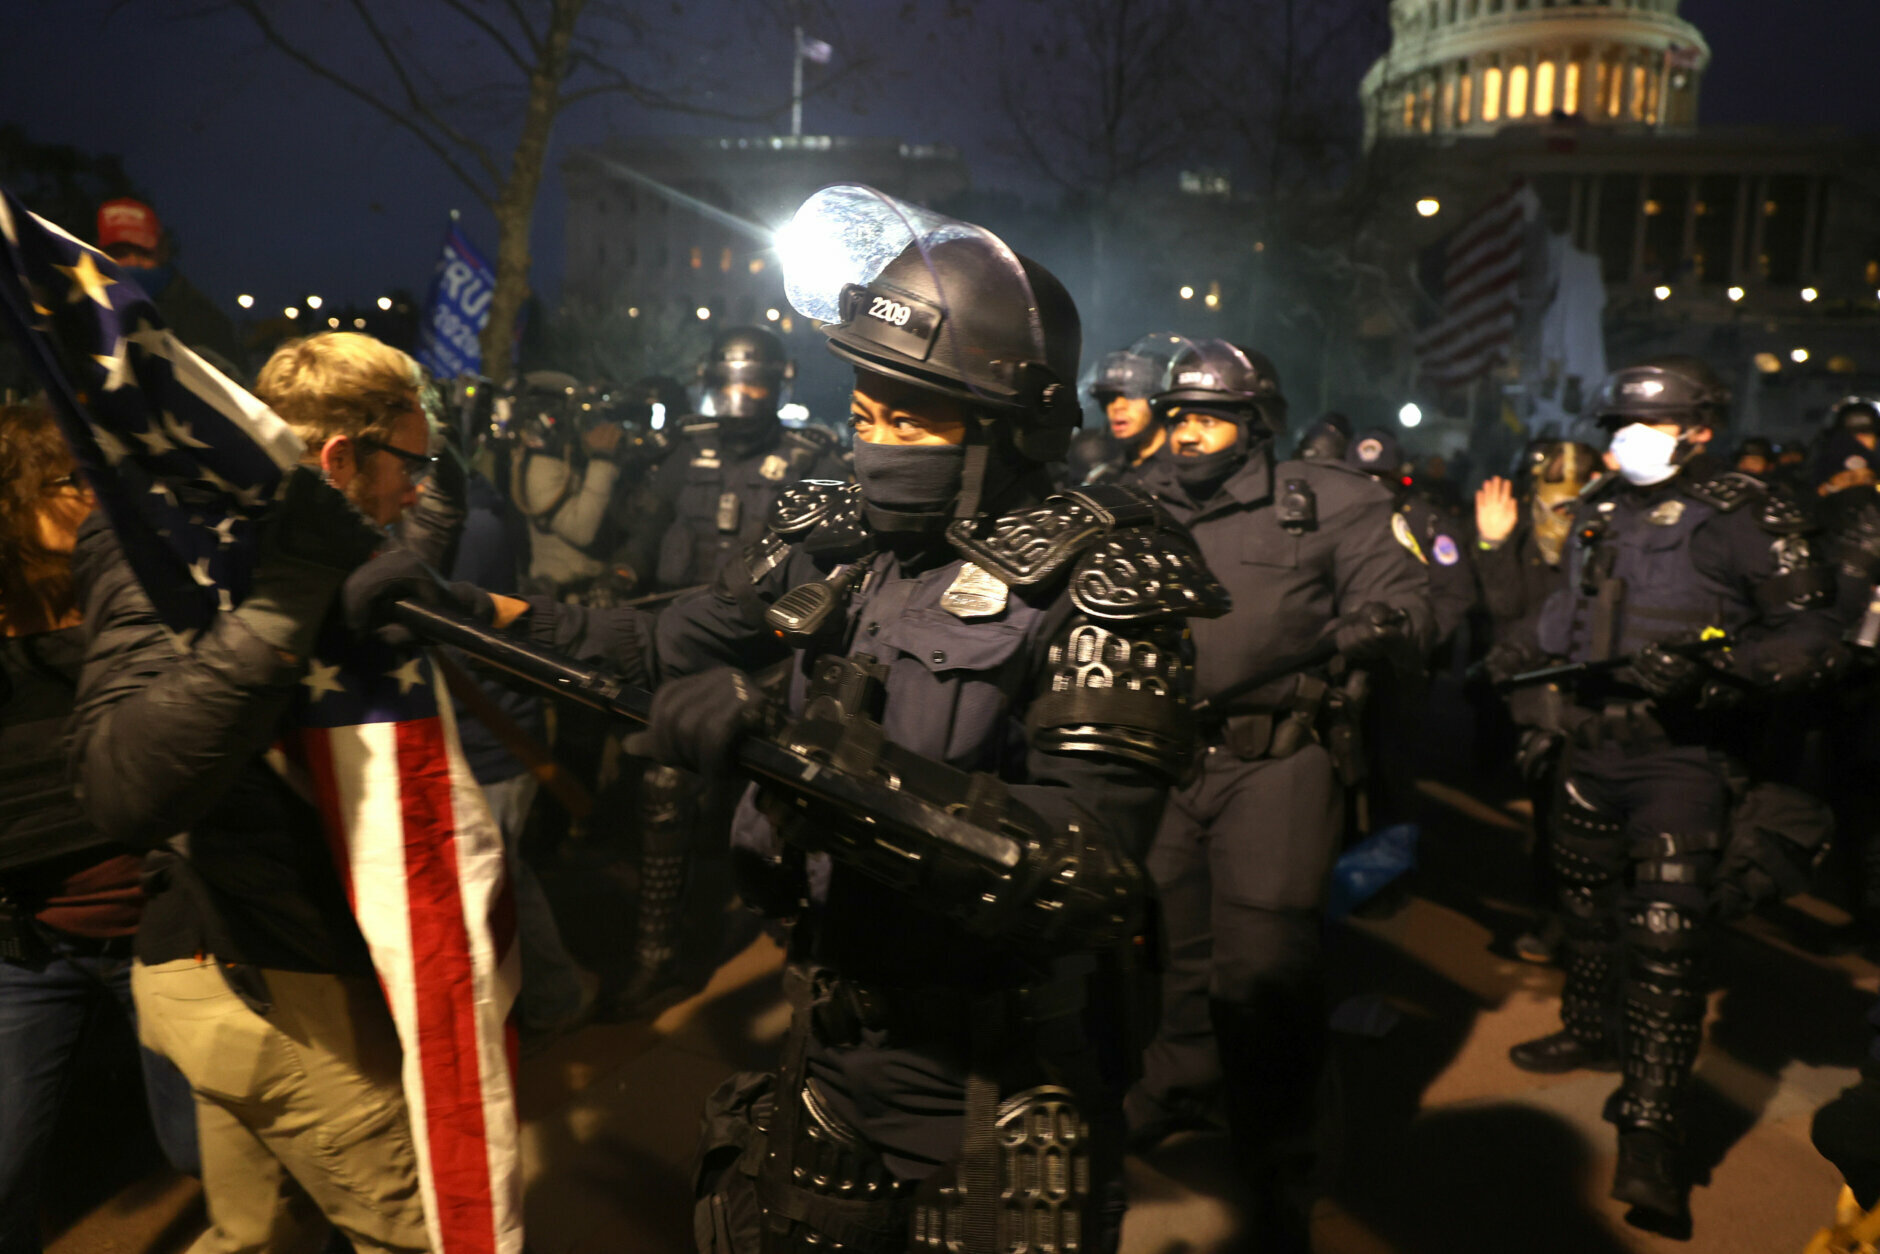 WASHINGTON, DC - JANUARY 06: Police officers in riot gear confront  protesters who are gathering at the U.S. Capitol Building on January 06, 2021 in Washington, DC. Pro-Trump protesters entered the U.S. Capitol building after mass demonstrations in the nation's capital during a joint session Congress to ratify President-elect Joe Biden's 306-232 Electoral College win over President Donald Trump. (Photo by Tasos Katopodis/Getty Images)